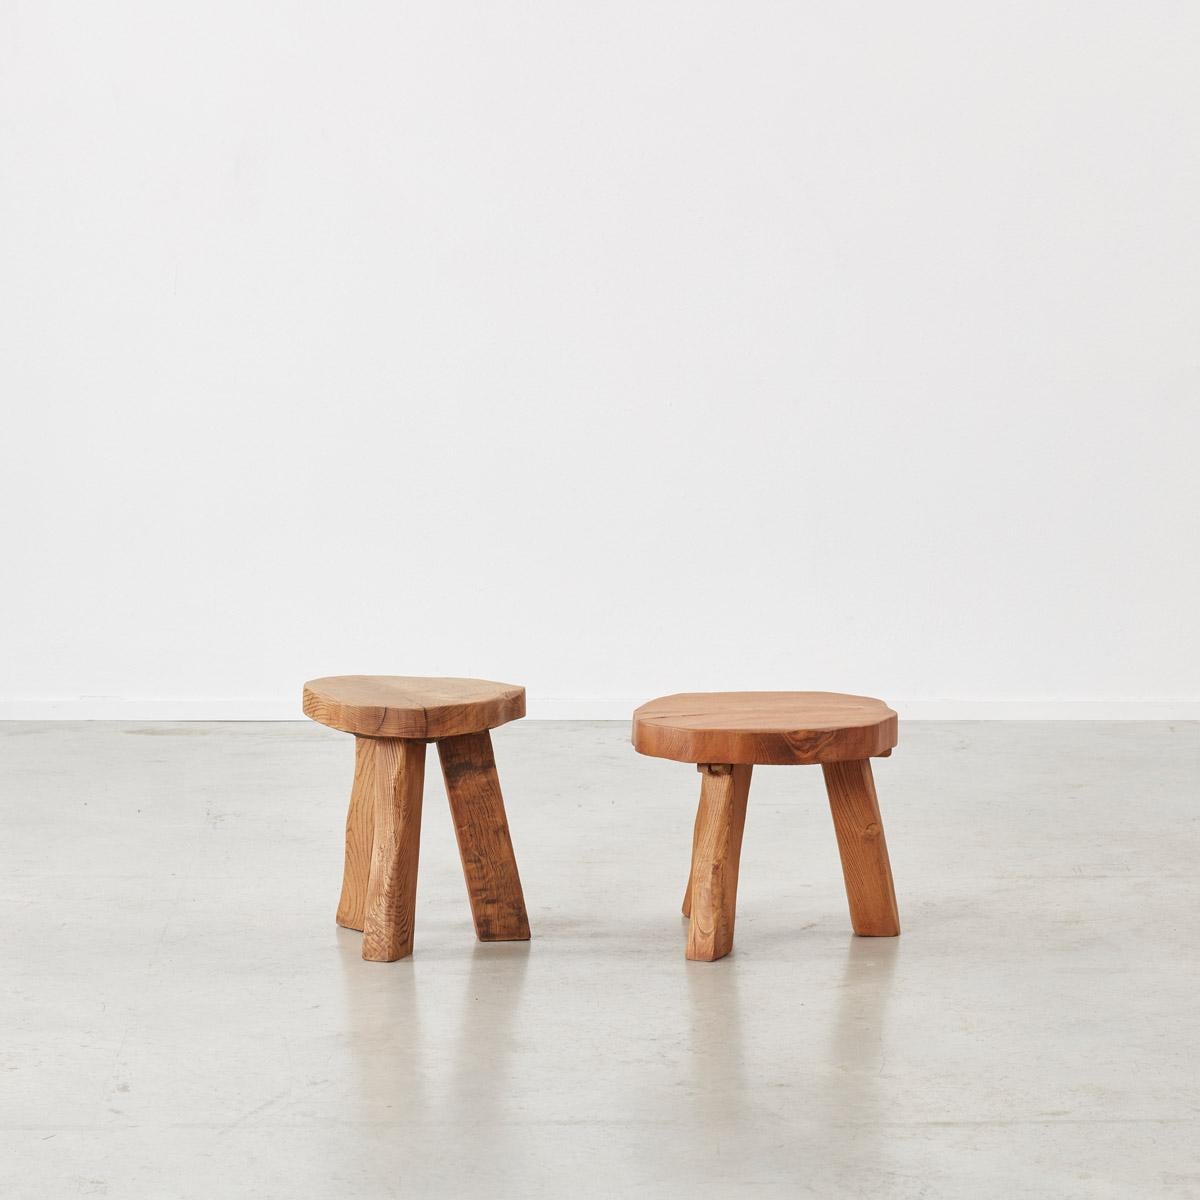 These small and quirky ‘milking’ stools are crafted from hardwood and evoke a more Primitive and purist form of carpentry. Each element of the stools is hand whittled and irregular, giving them a charming rustic appearance. Furthermore, each of the